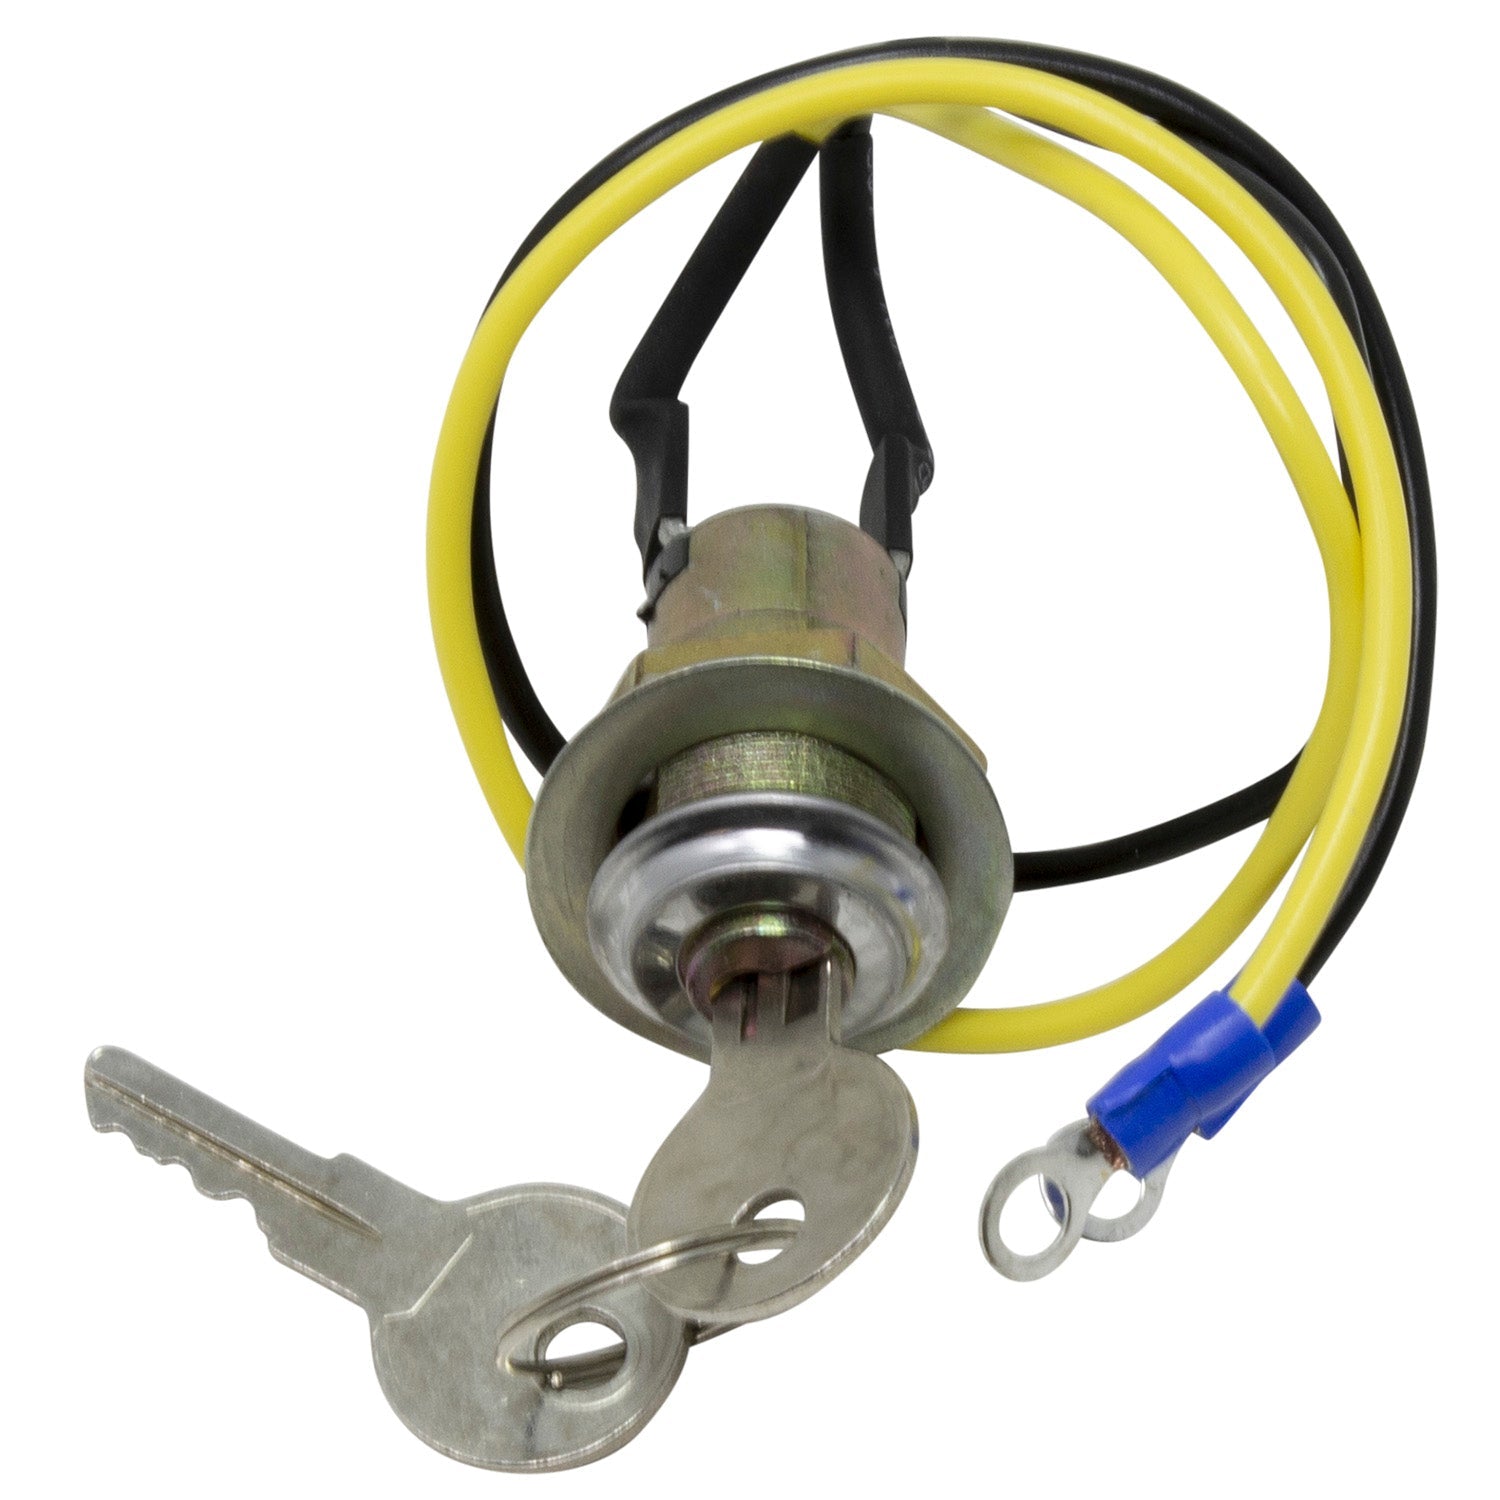 764929M91, Ignition Switch For Massey Ferguson at Duraforce